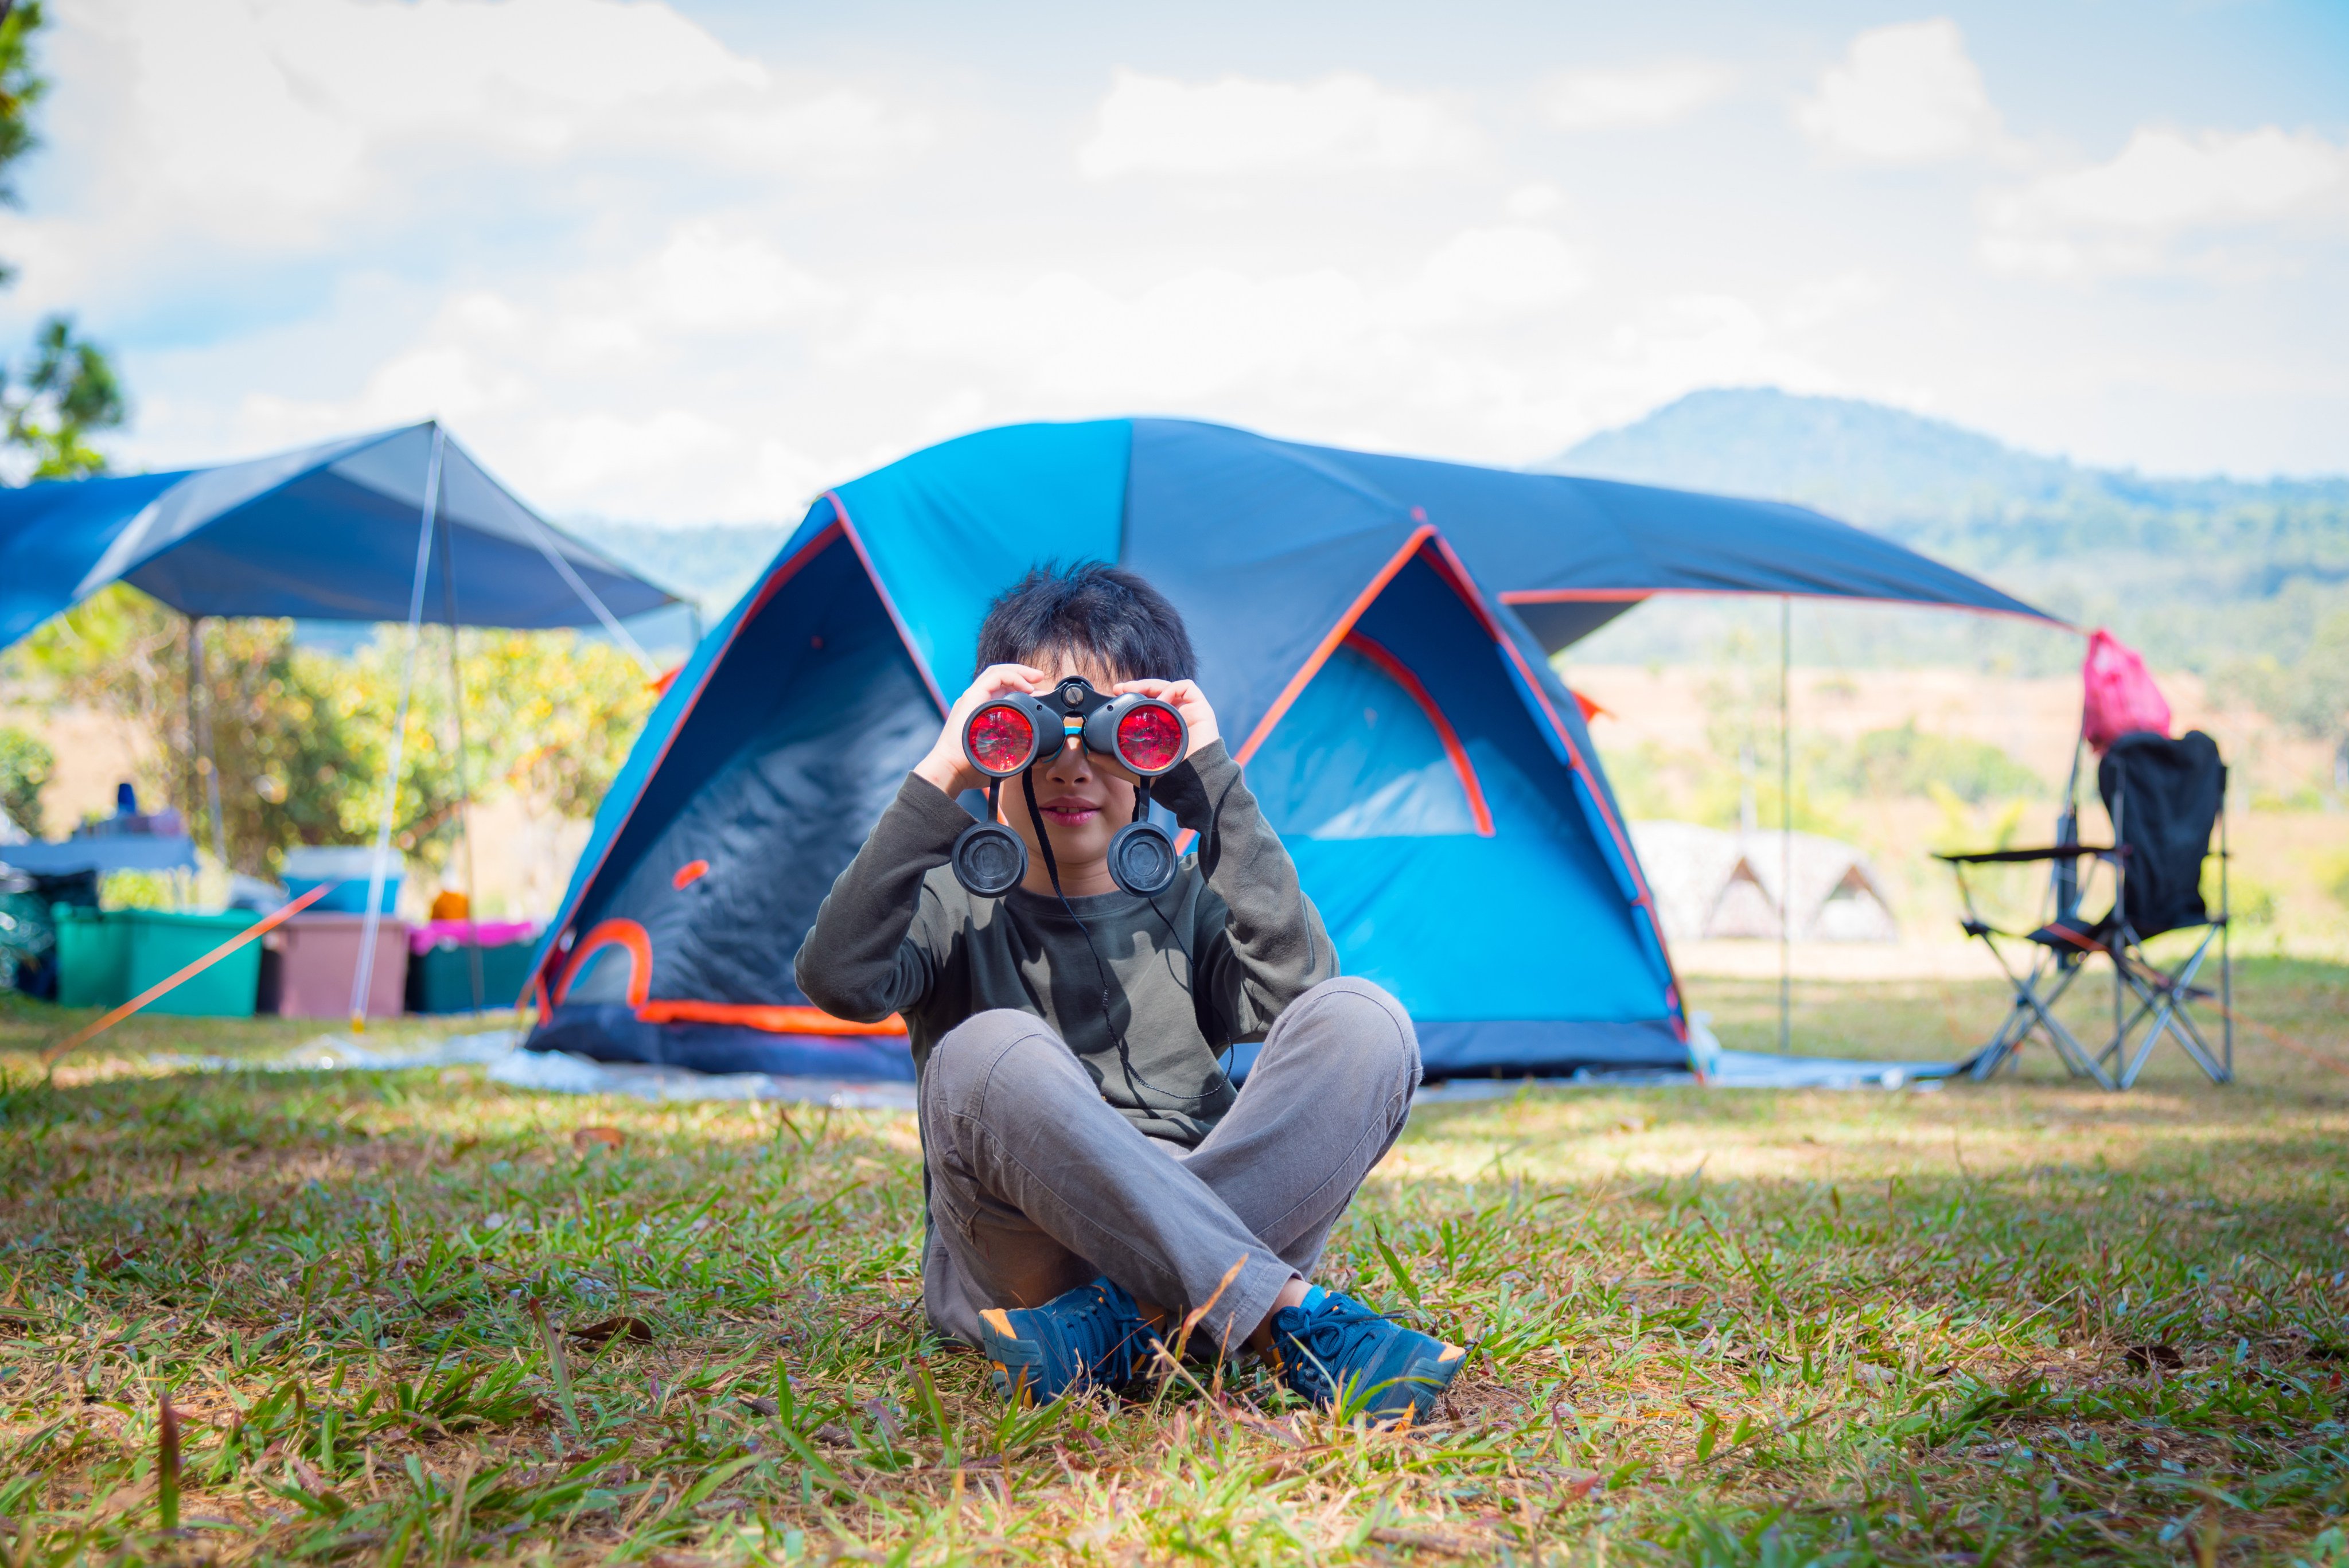 Hong Kong summer camps for kids of all ages, from Singapore International School’s sports and STEM courses to the YMCA’s camping activities. Photo: Shutterstock